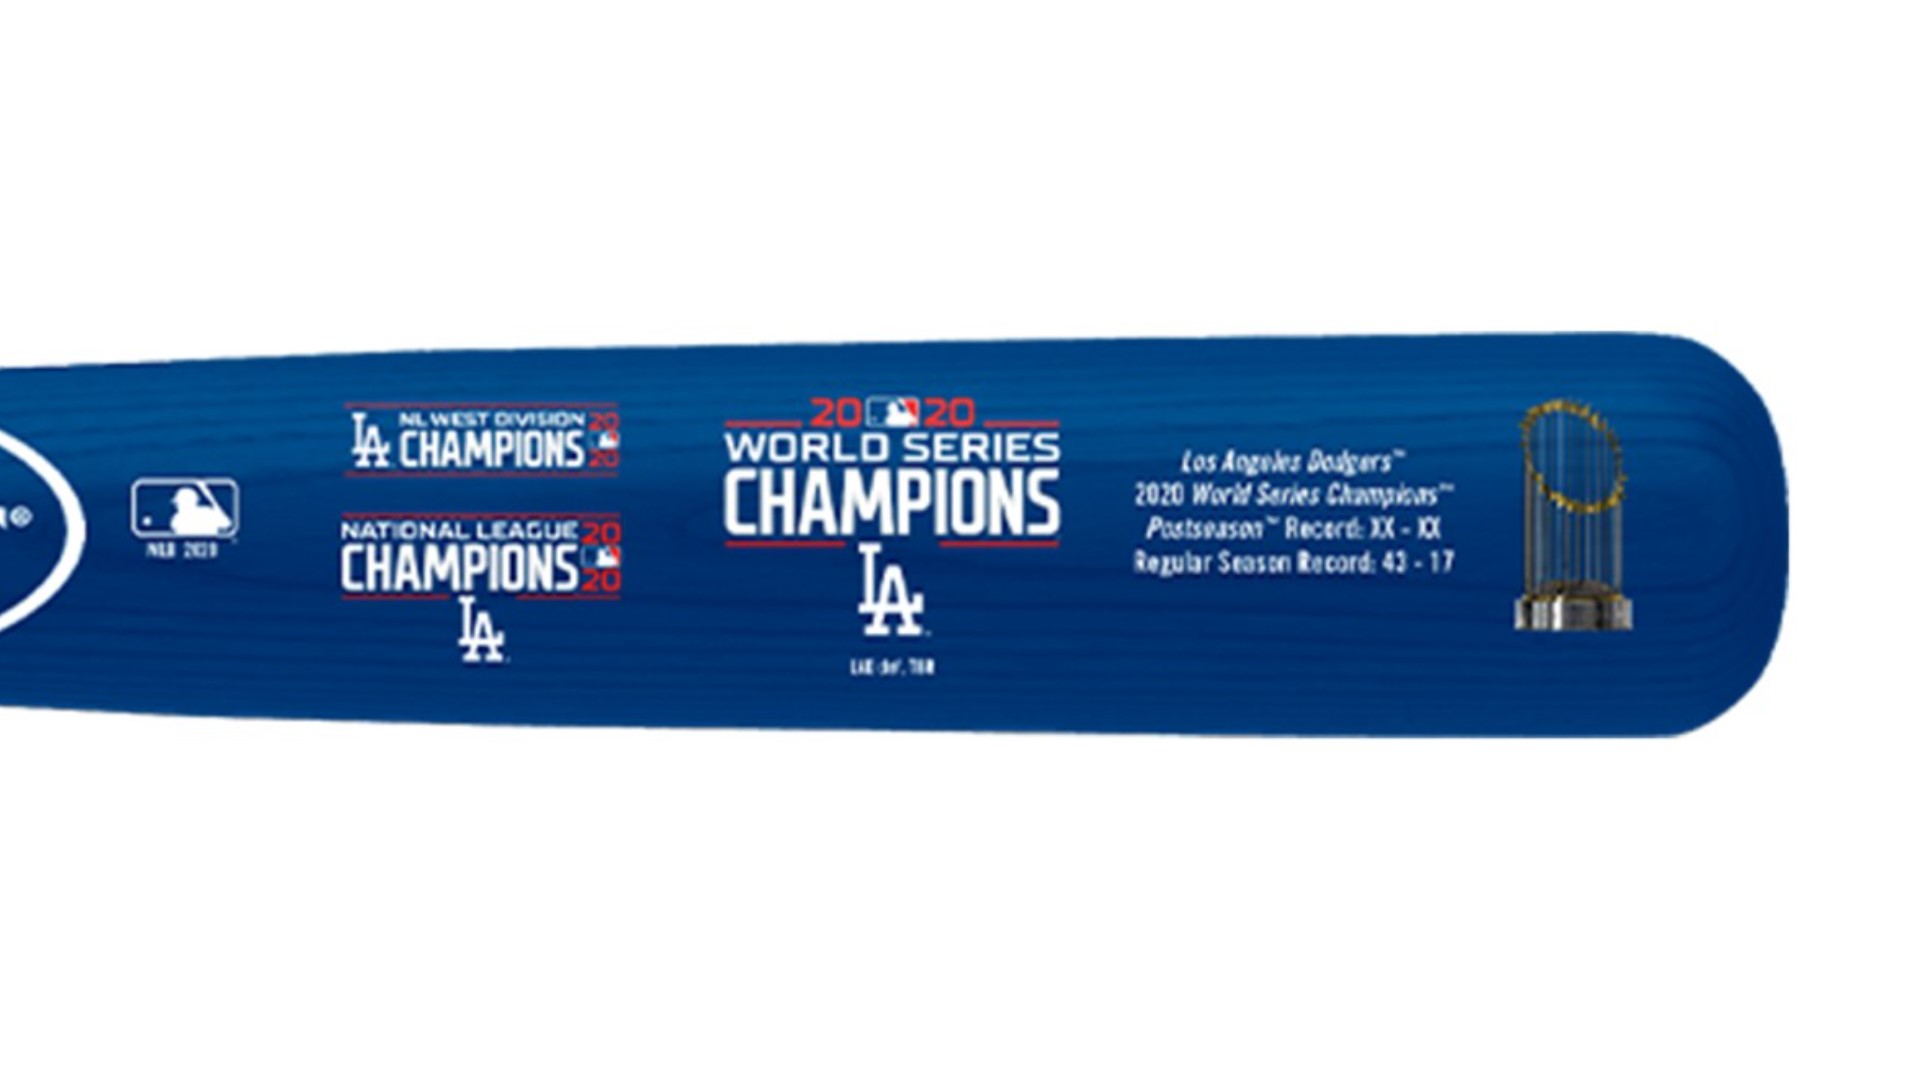 Fans can purchase a 34-inch Louisville Slugger bat in team colors with the Dodgers’ World Series Champions logo and trophy.